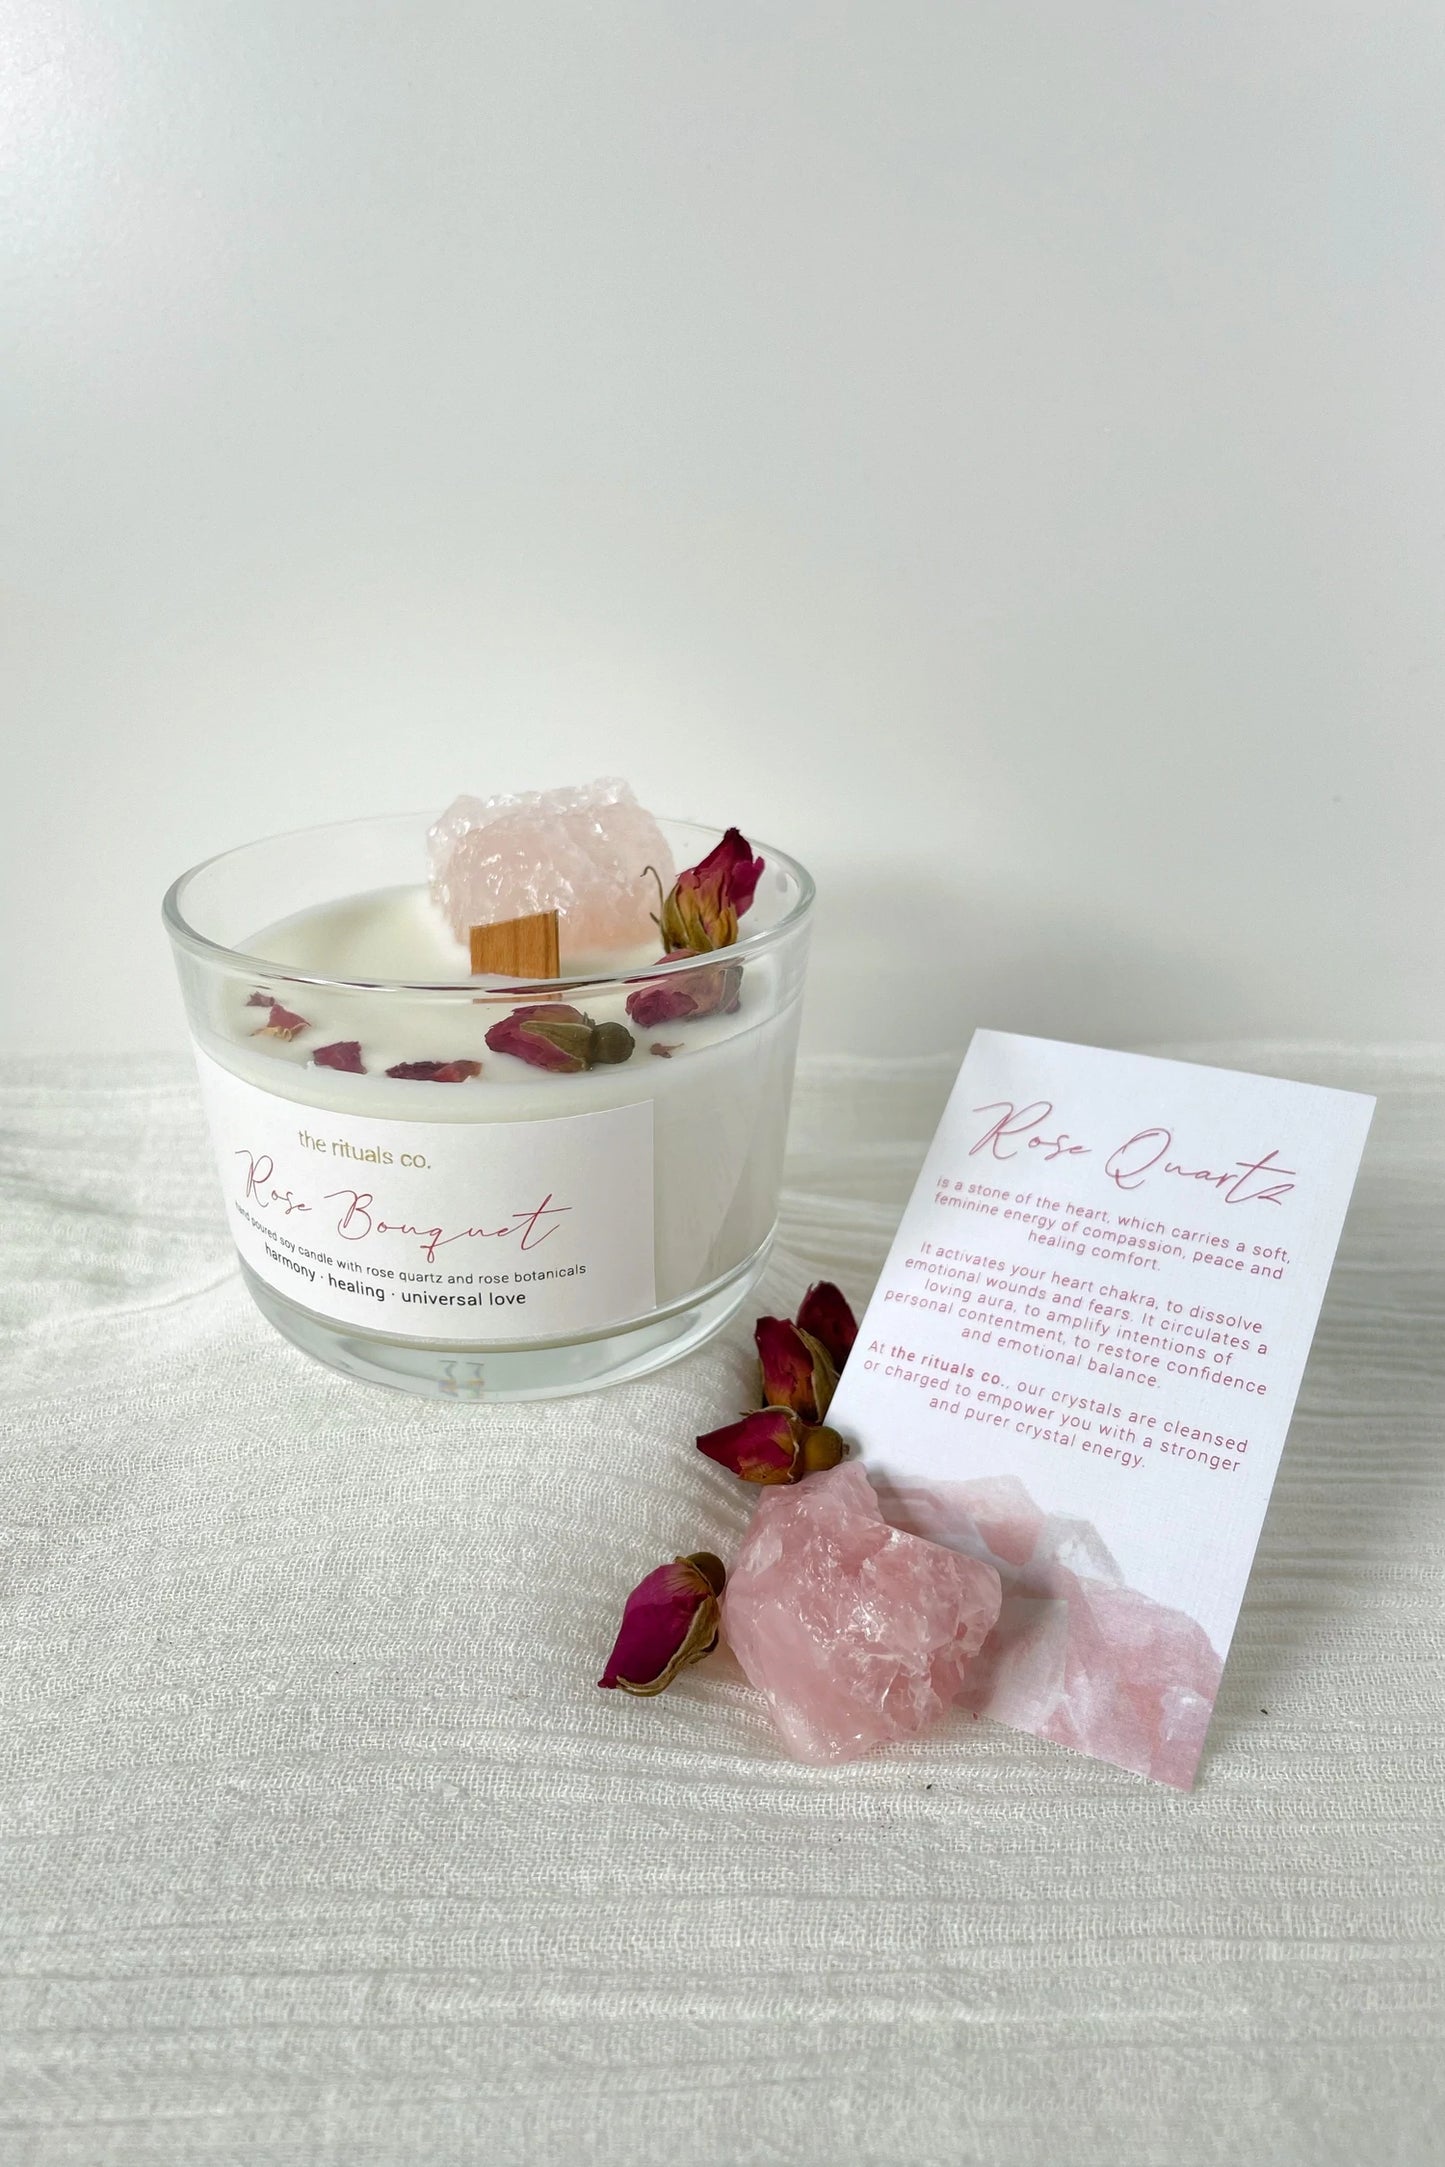 Rose Bouquet Crystal Scented Candle (Handmade by the rituals co.)